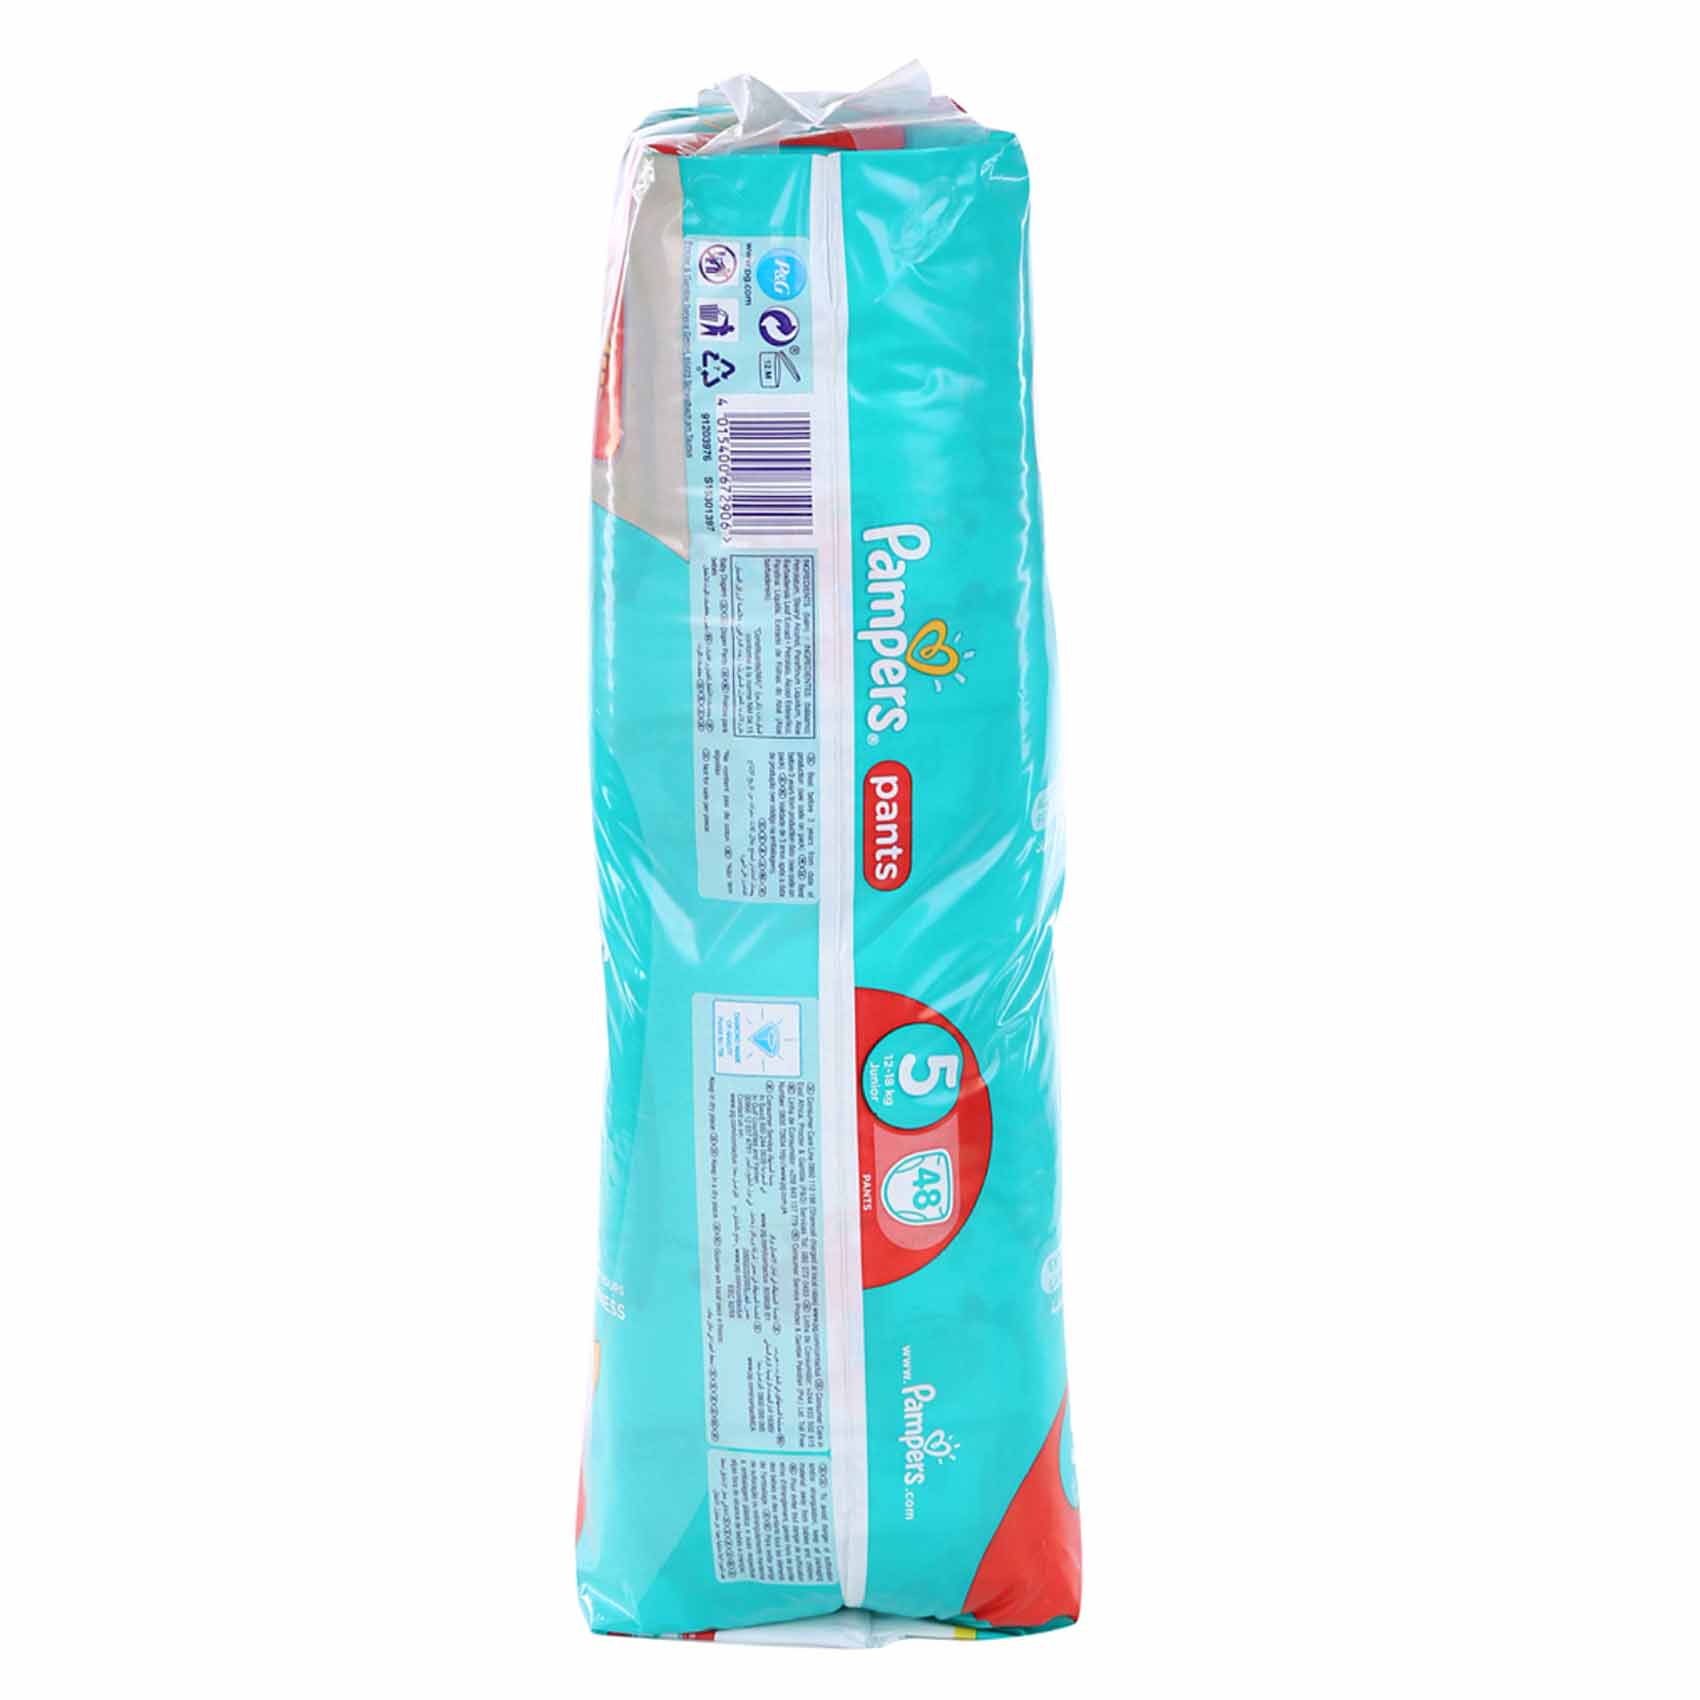 Buy Pampers Baby Pants Diapers Jumbo Pack Medium Size 3 60 Count 6-11 KG  Online - Shop Baby Products on Carrefour Lebanon